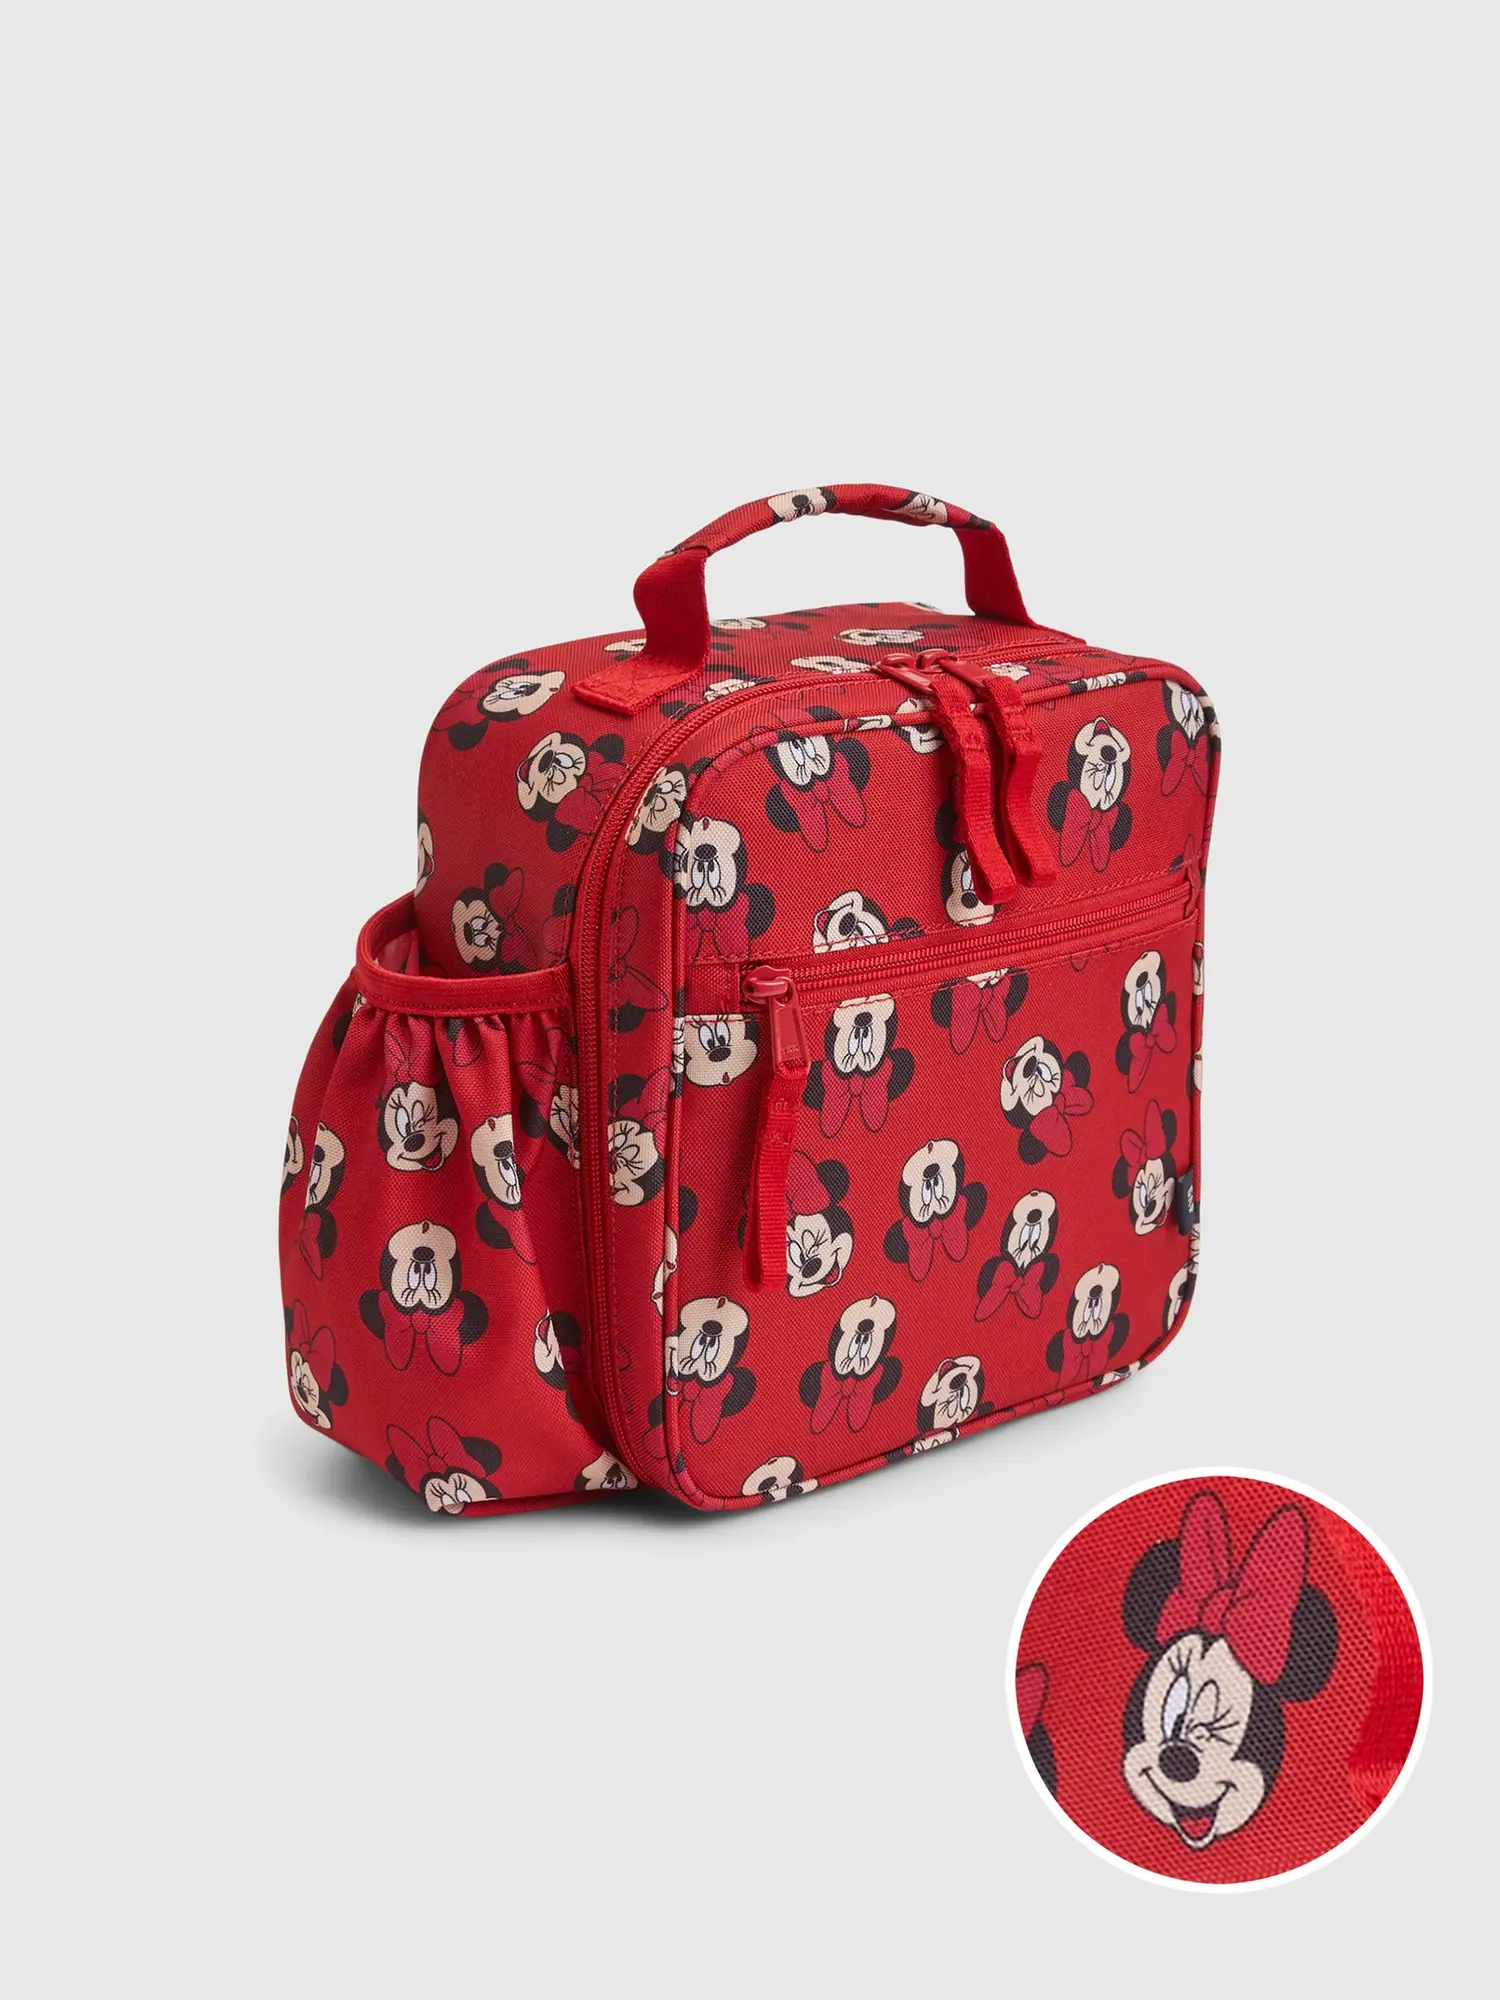 Gap Kids &#124 Disney Recycled Minnie Mouse Lunchbag red. 1